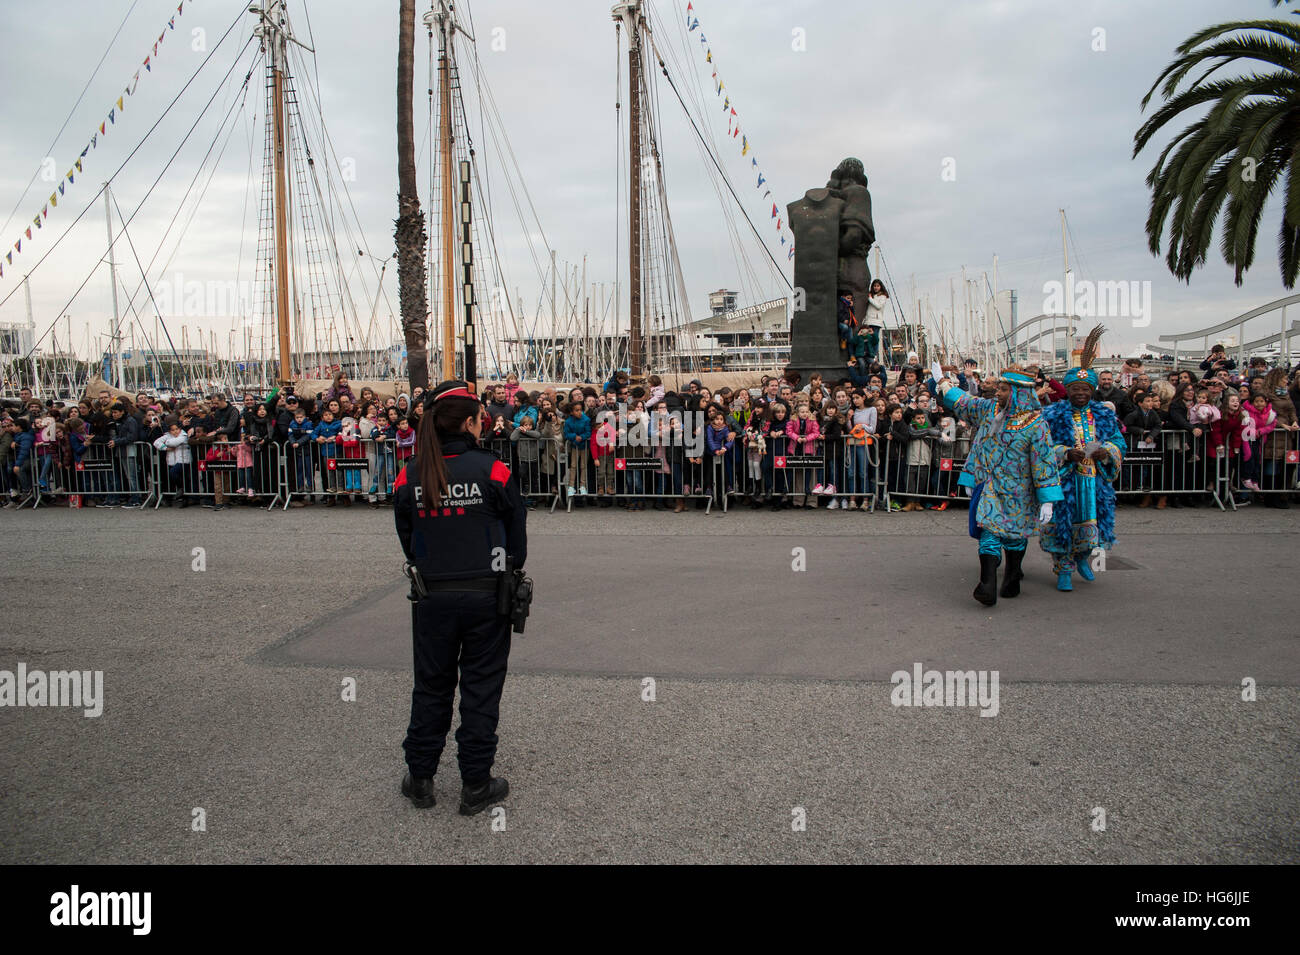 The Three Kings arrive by boat to Barcelona, Spain, thursday, 05th Jan, 2017. It is a parade symbolizing the coming of the Magi to Bethlehem following the birth of Jesus. In Spain and many Latin American Countries Epiphany is the day When gifts are Exchanged. © Charlie Perez/Alamy Stock Photo